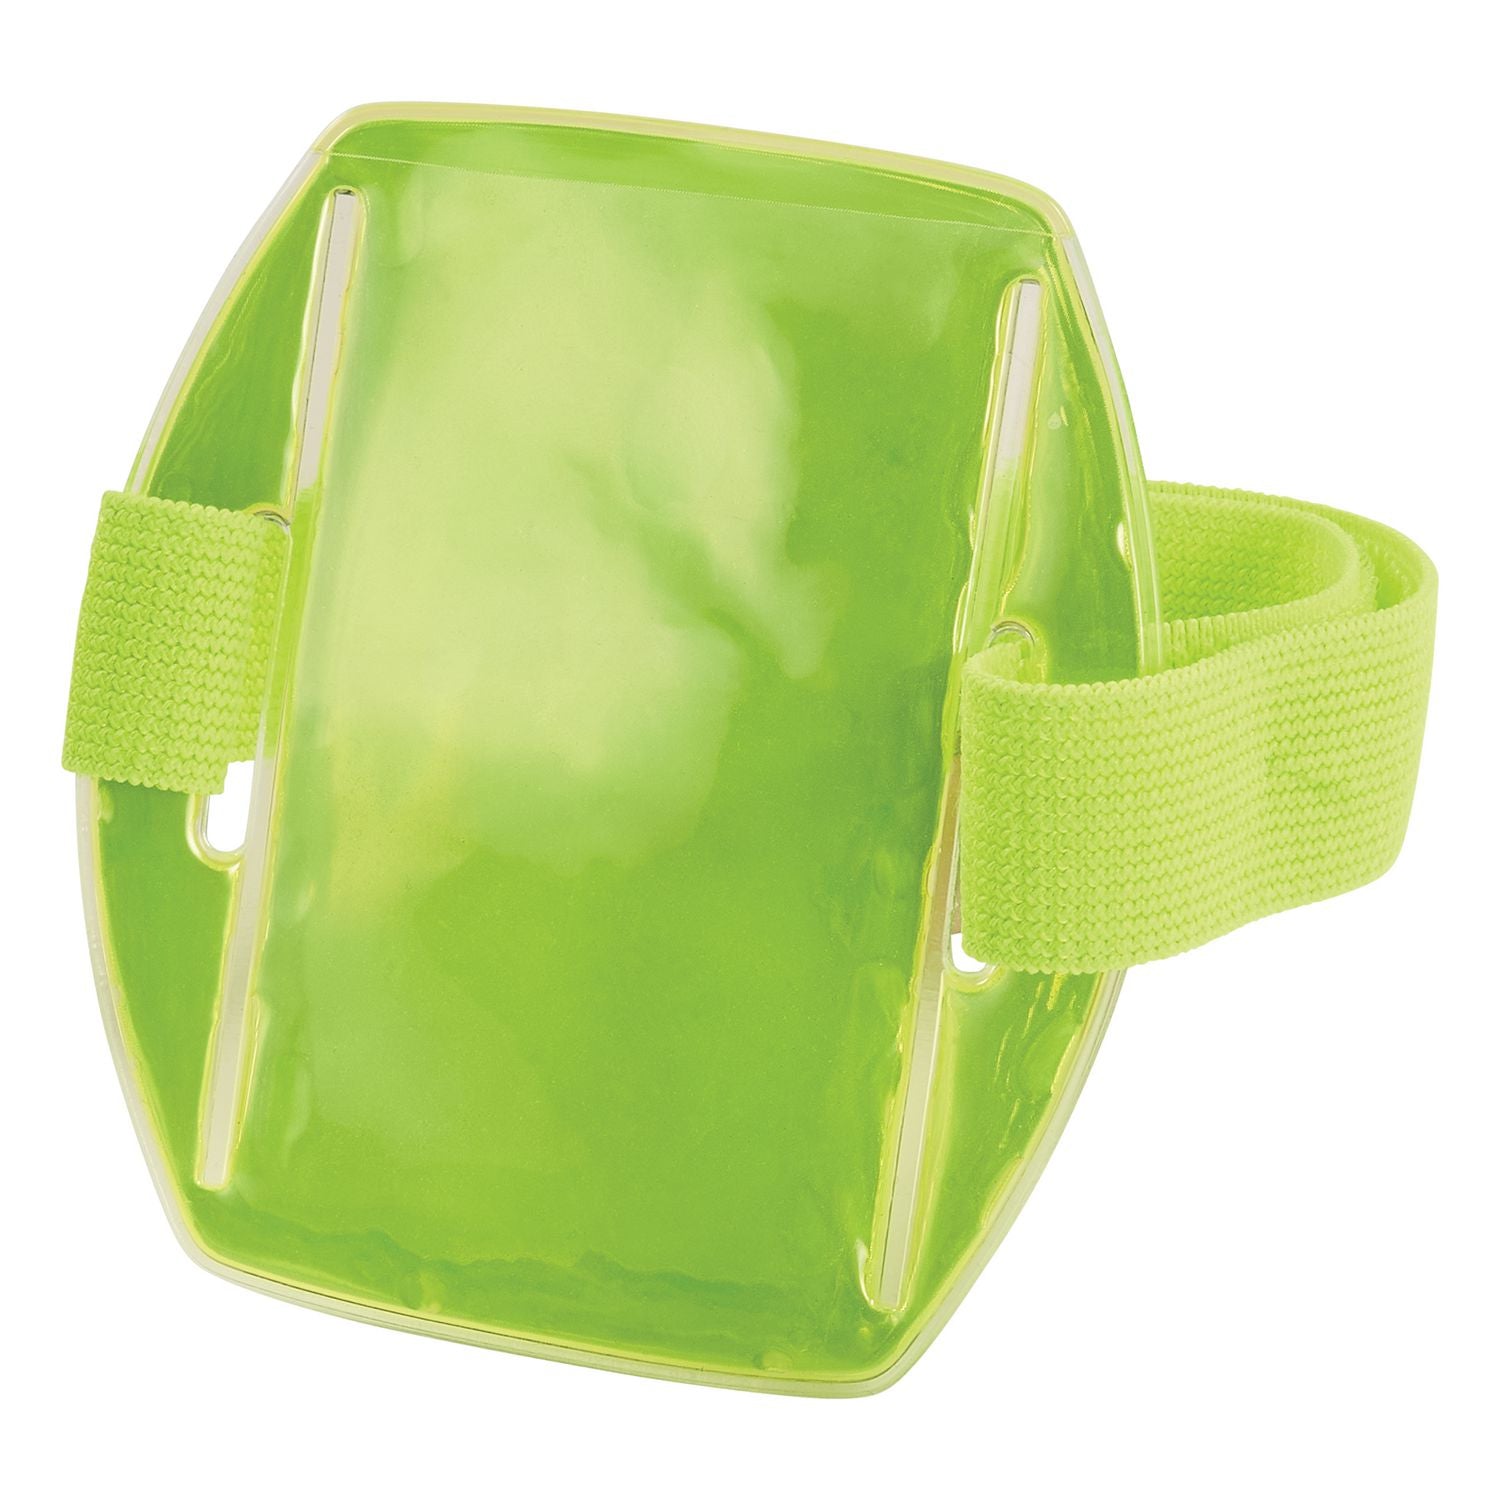 squids-3386-arm-band-id-badge-holder-vertical-lime-375-x-425-holder-25-x-4-insert-10-pack-ships-in-1-3-business-days_ego19970 - 3